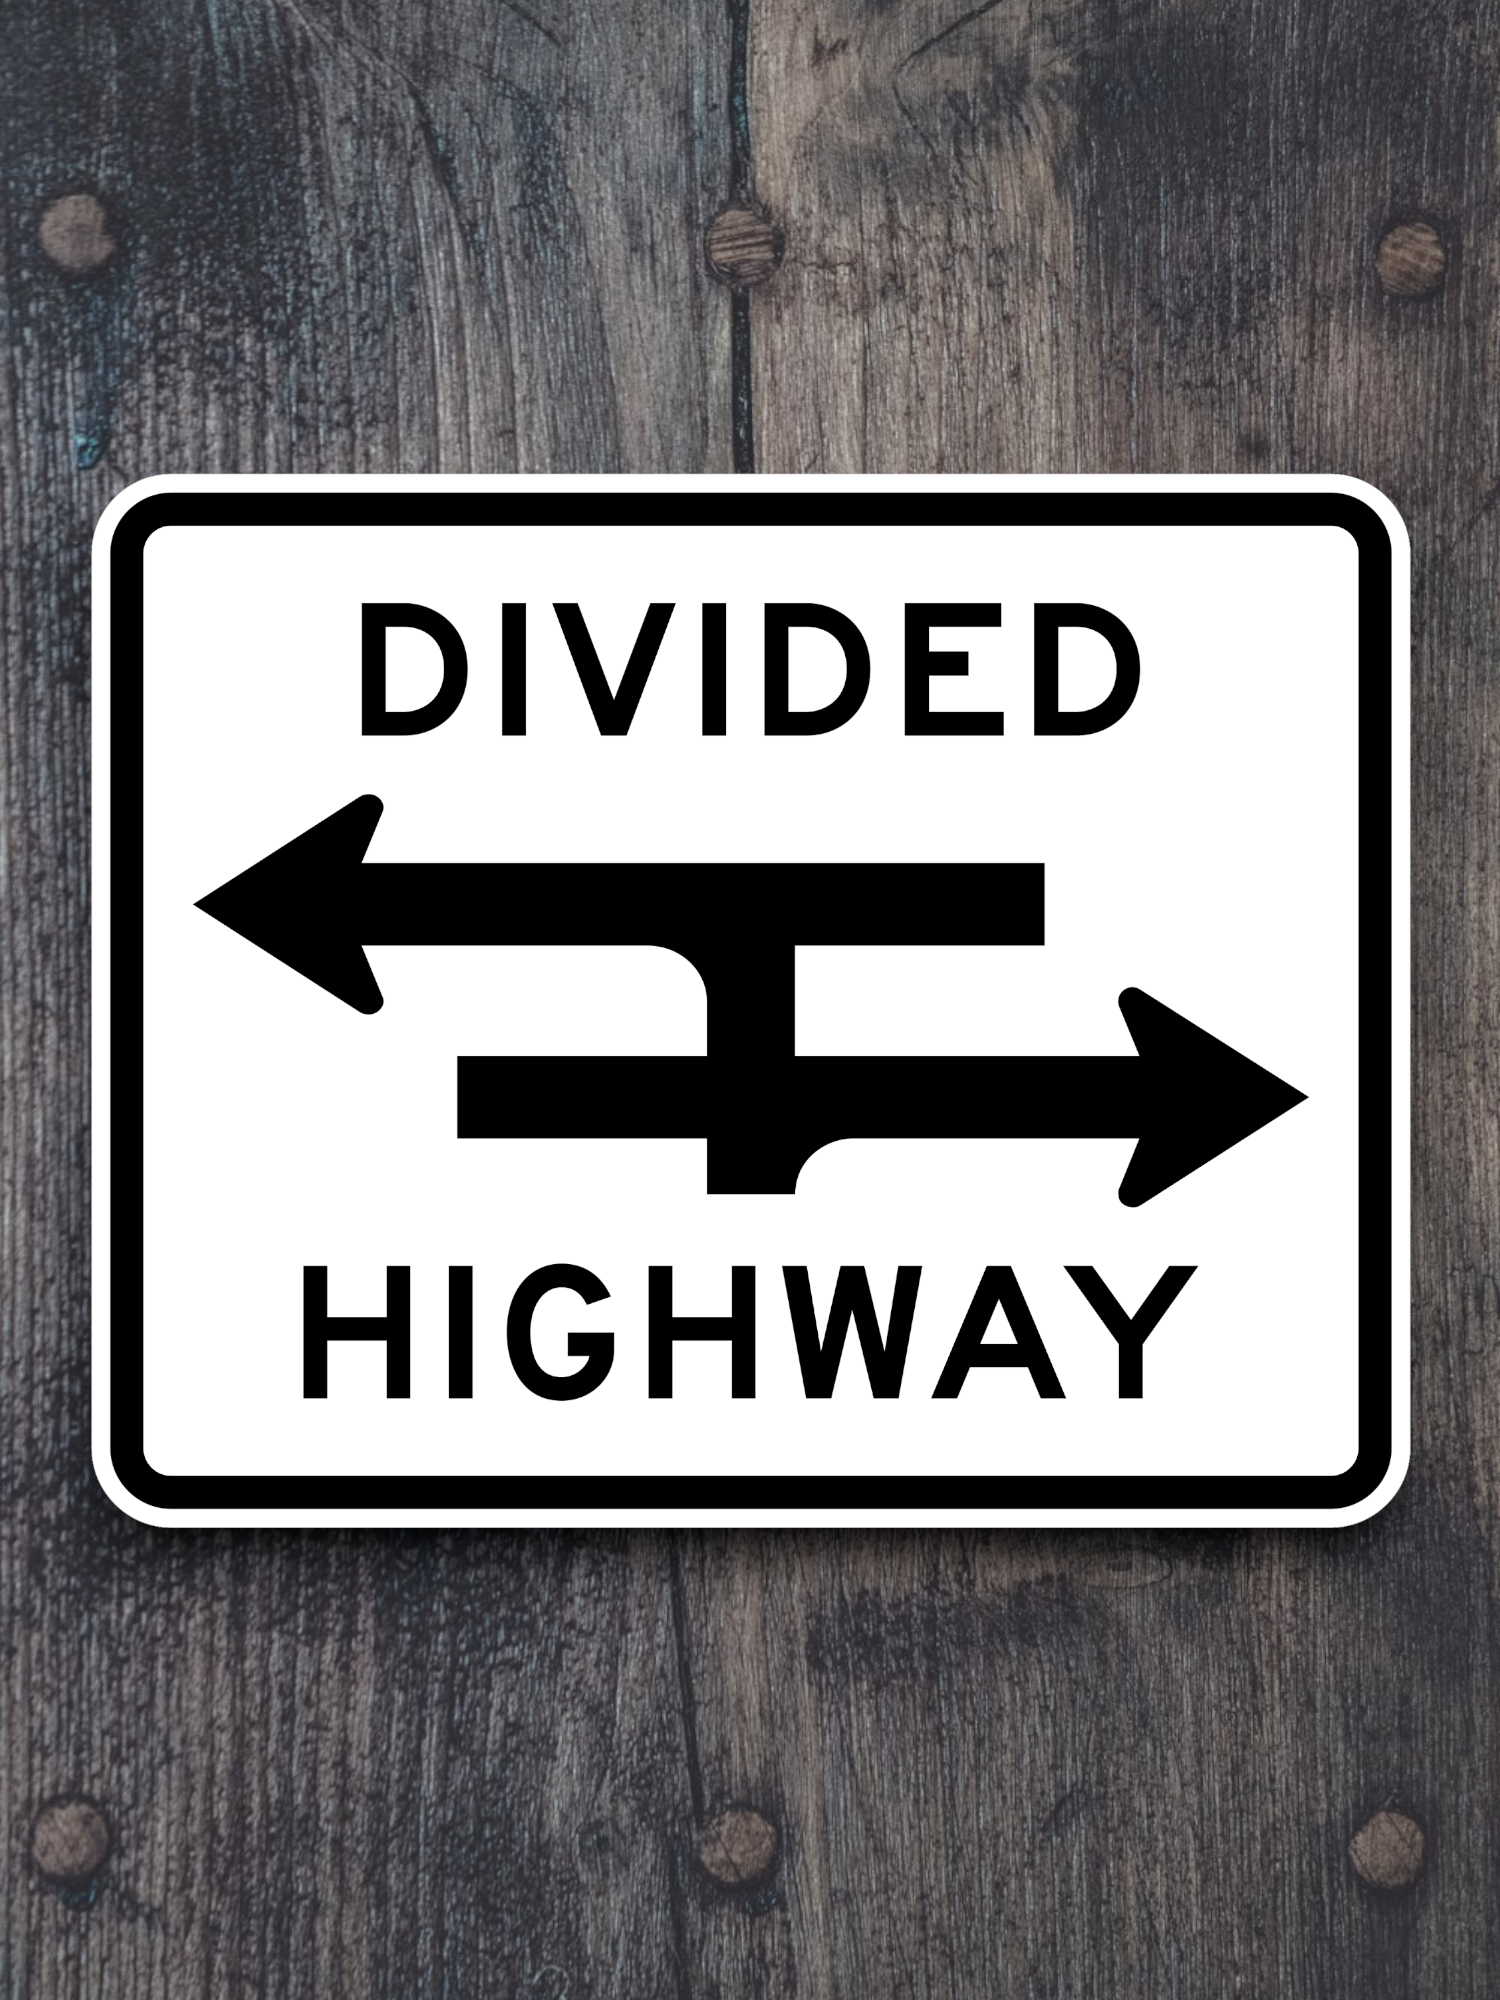 Divided highway crossing T-intersection United States Road Sign Sticker